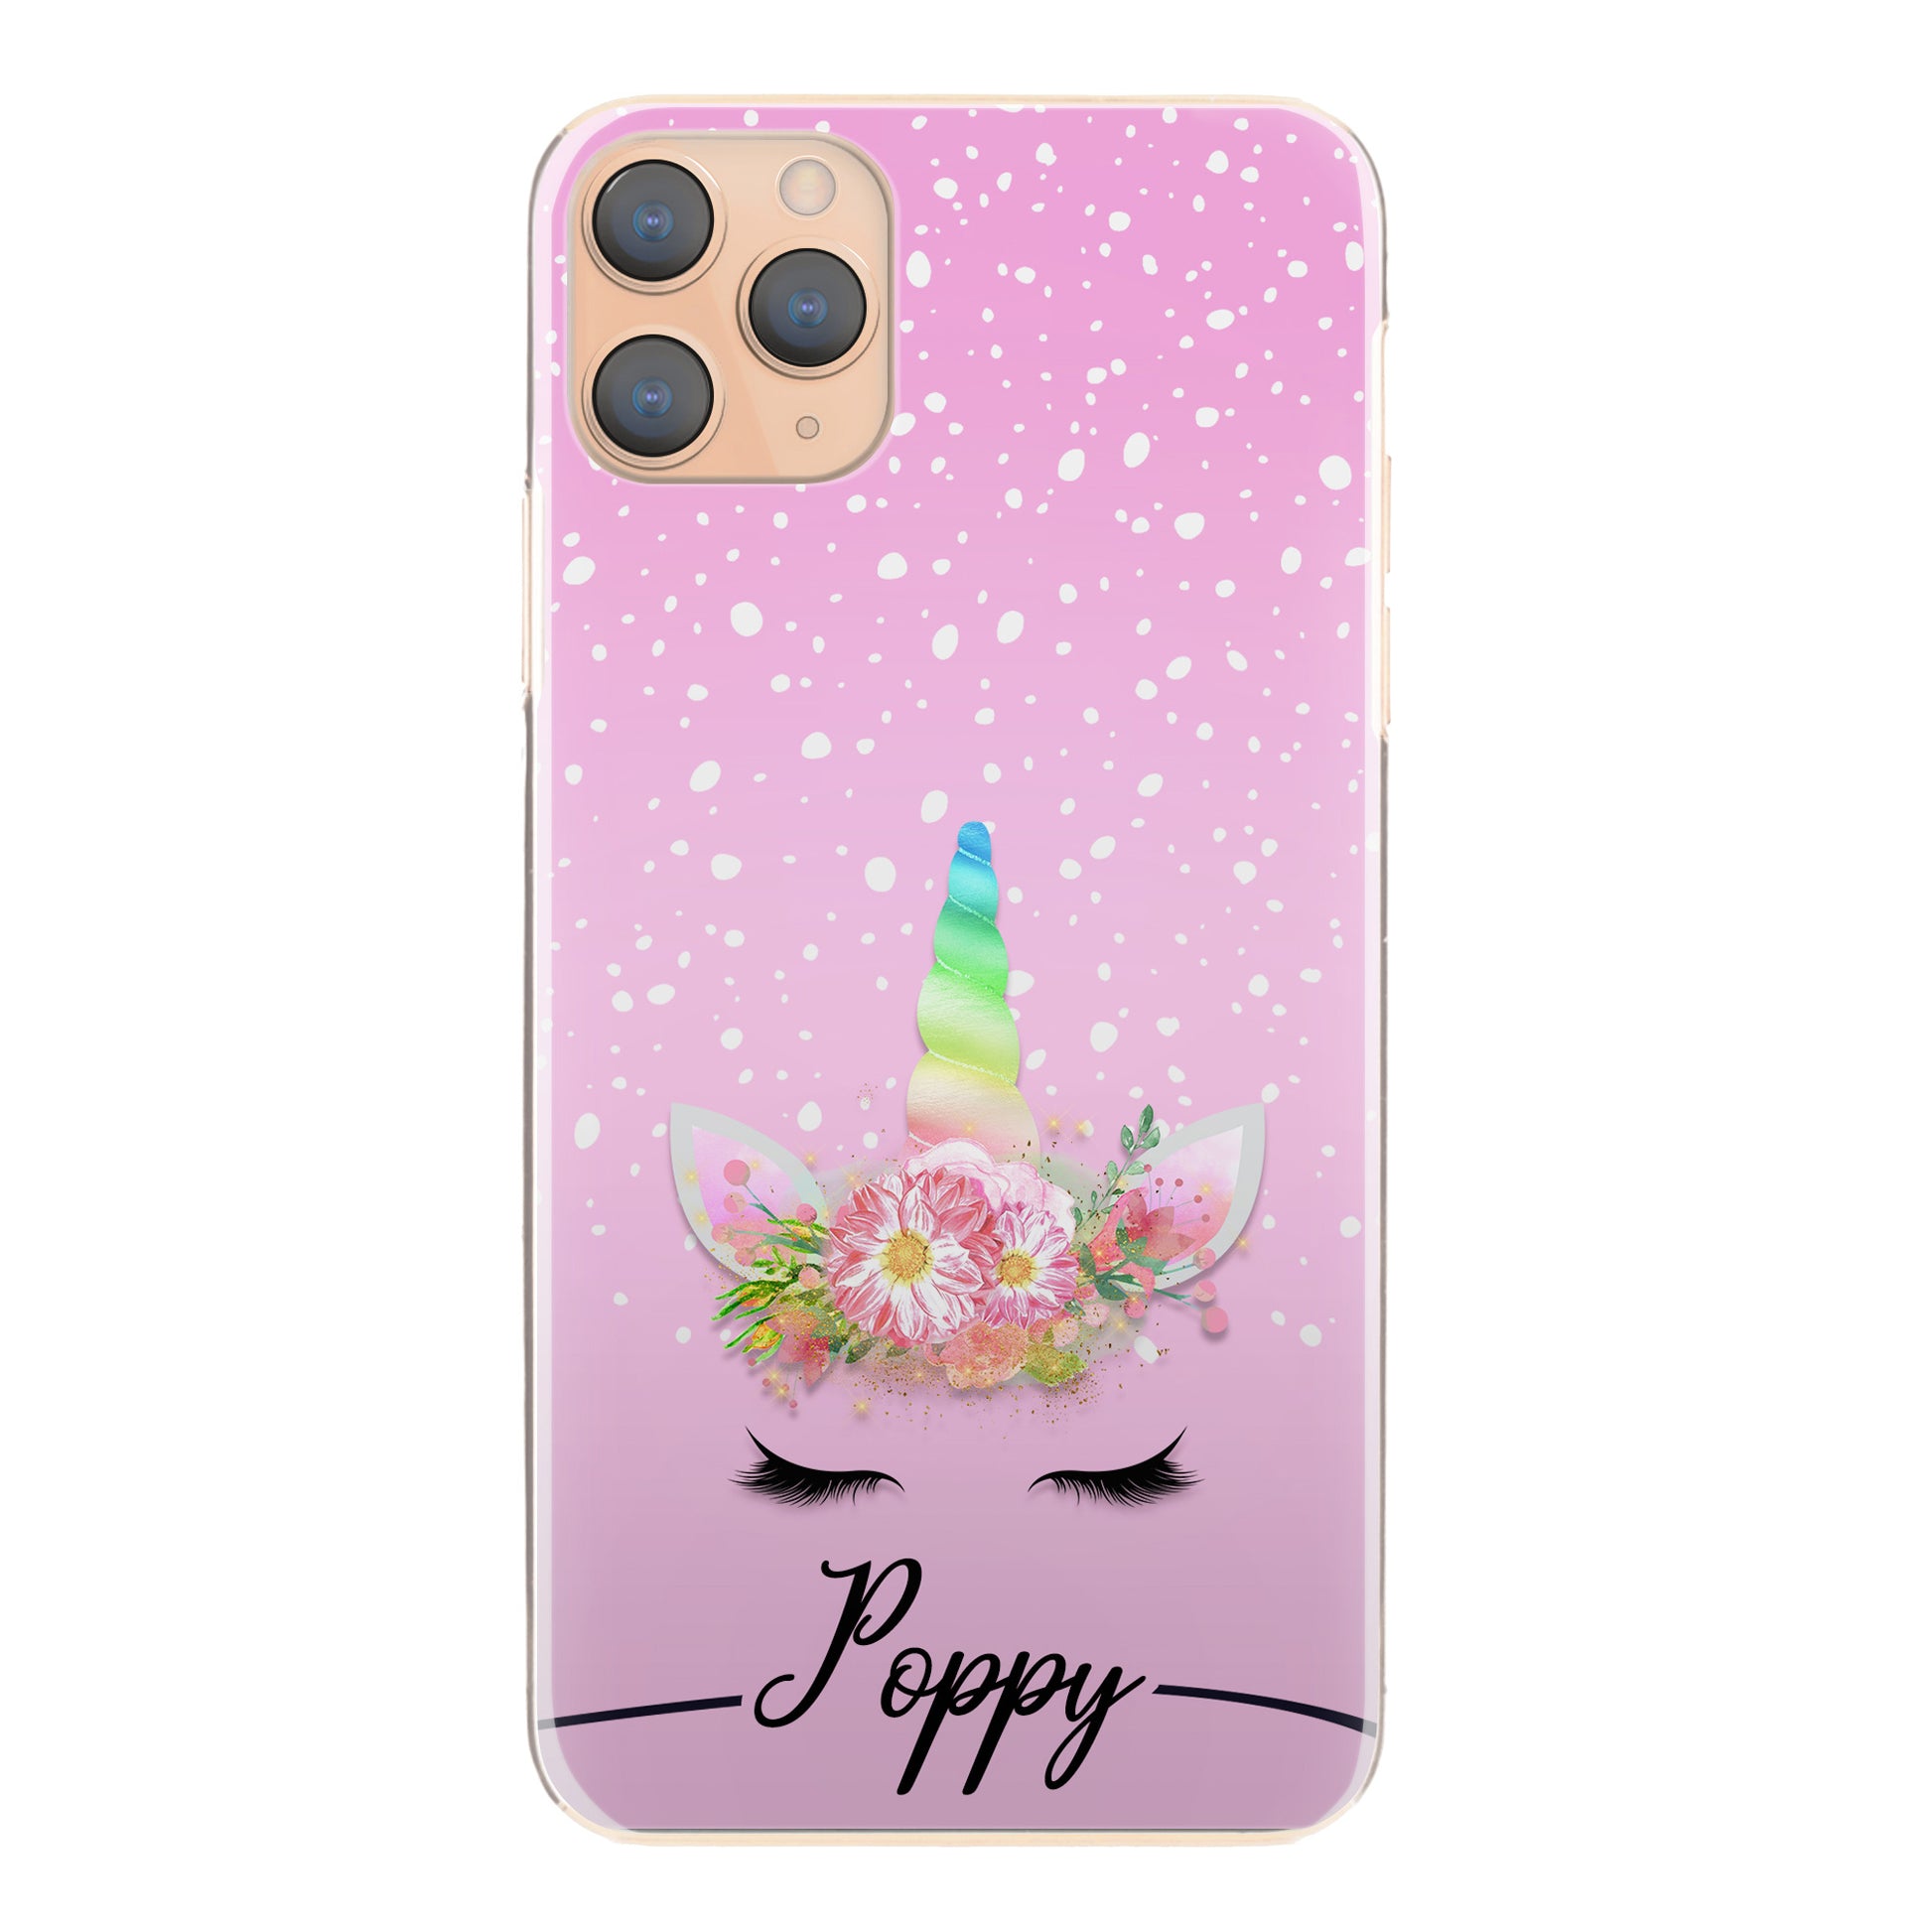 Personalised Nokia Phone Hard Case with Rainbow Floral Unicorn and Text on Pink